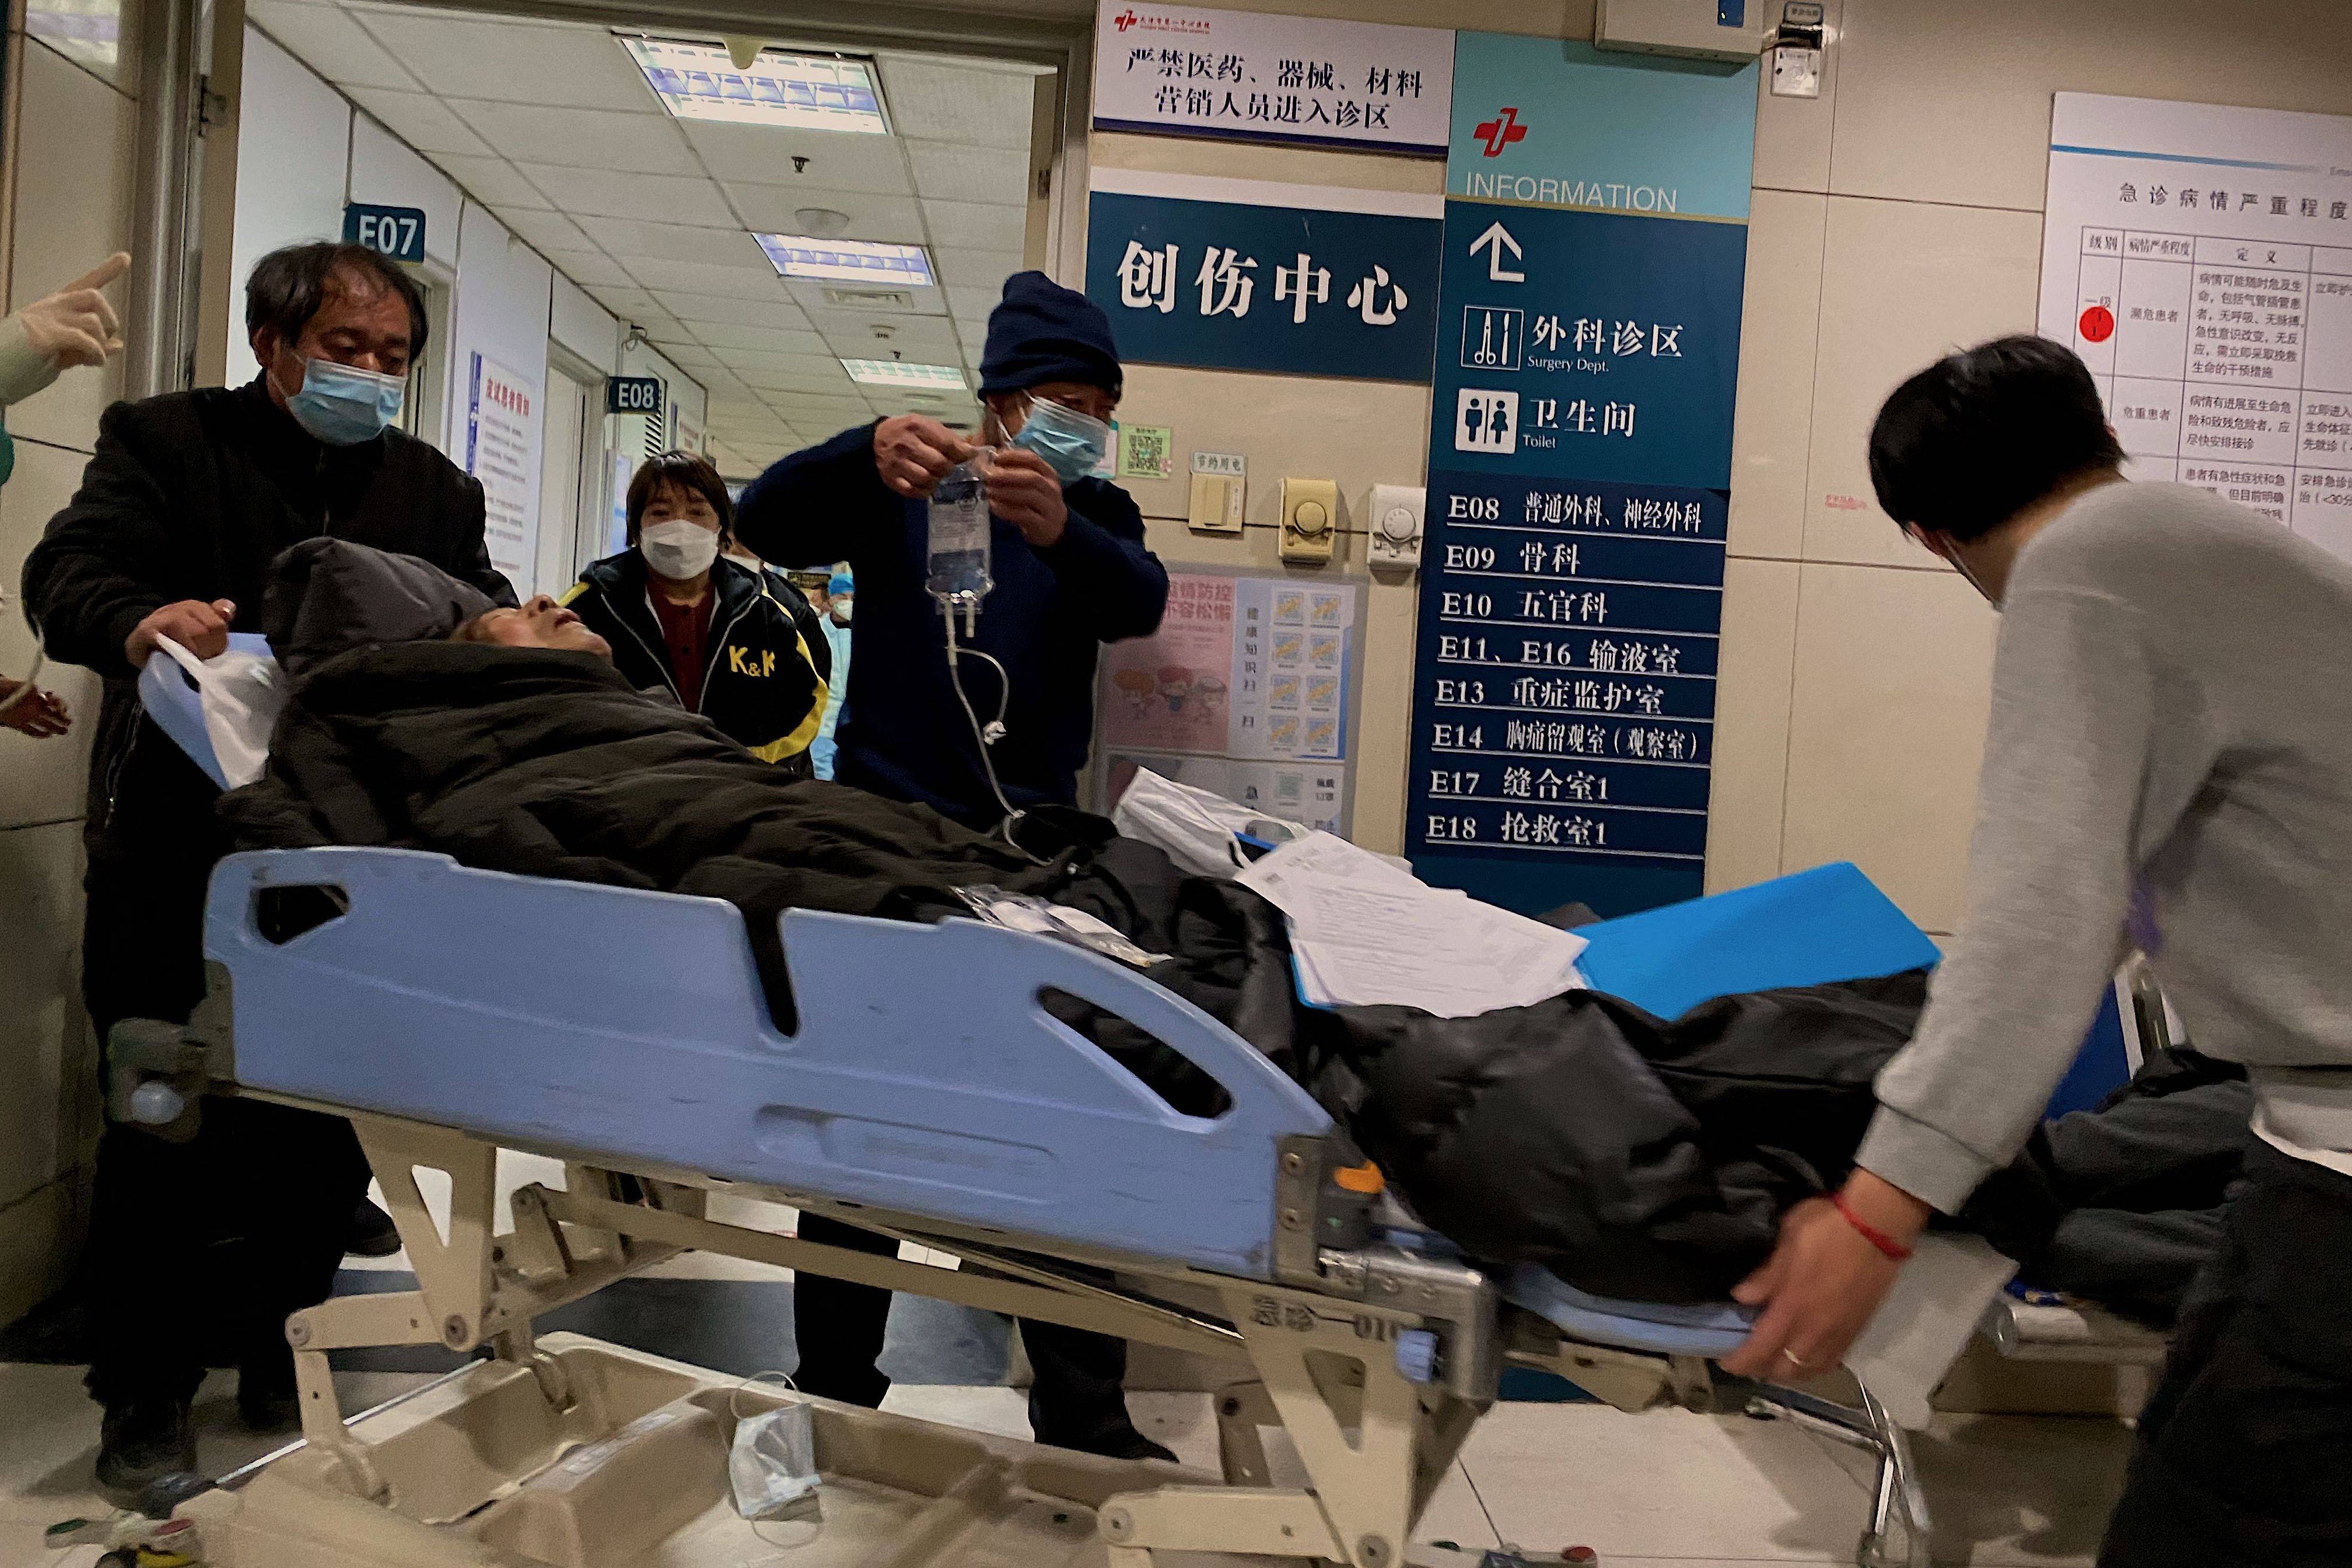 While Covid-19 cases have likely peaked in major cities, China could see a surge in hospitalisations of high-risk patients, according to infectious disease specialists. Photo: AFP